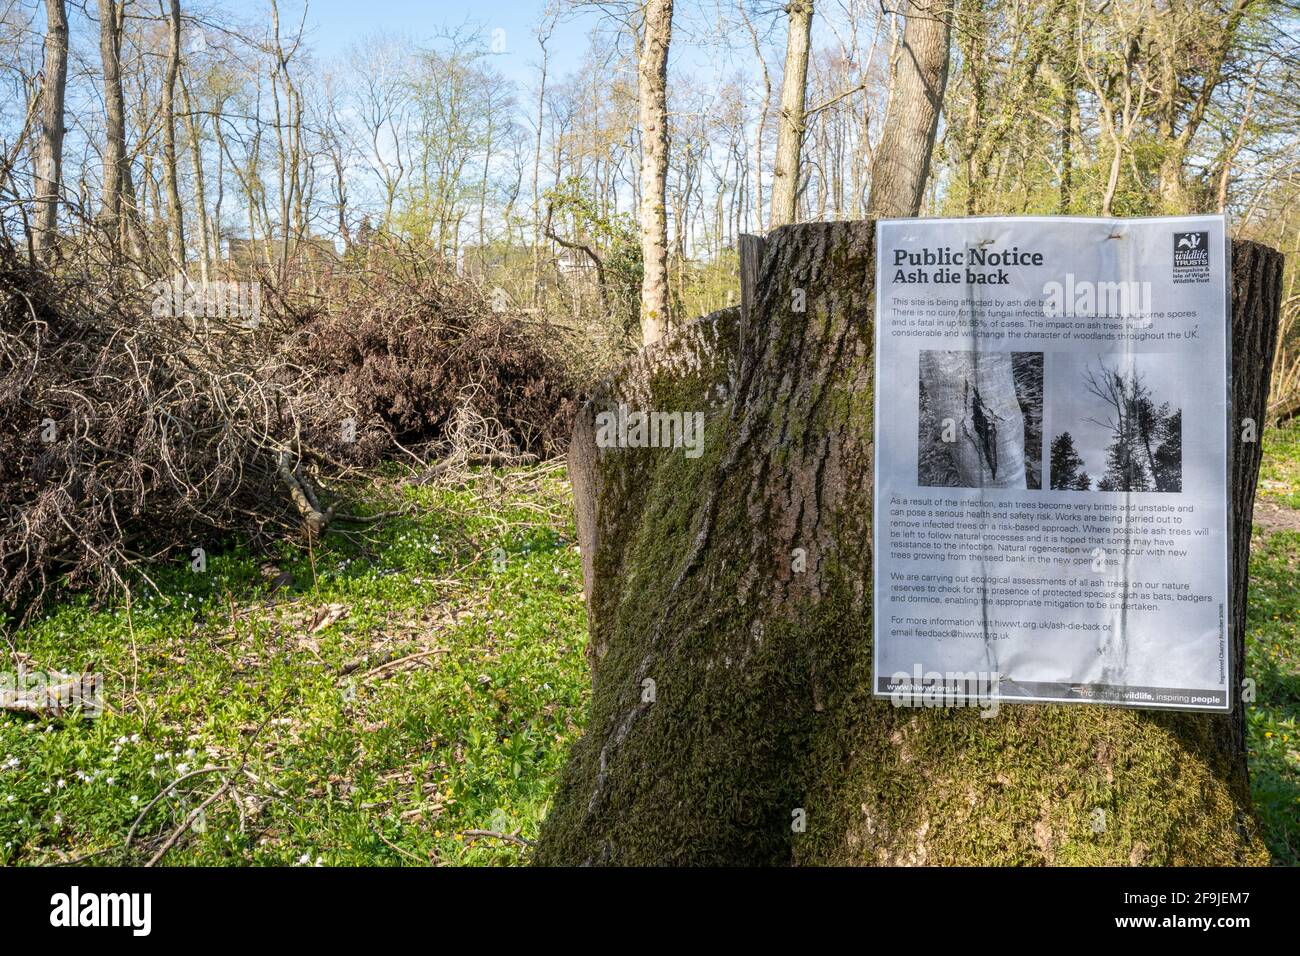 Ash dieback tree disease notice in woodland with ash trees chopped down for safety reasons, Hampshire, England, UK Stock Photo